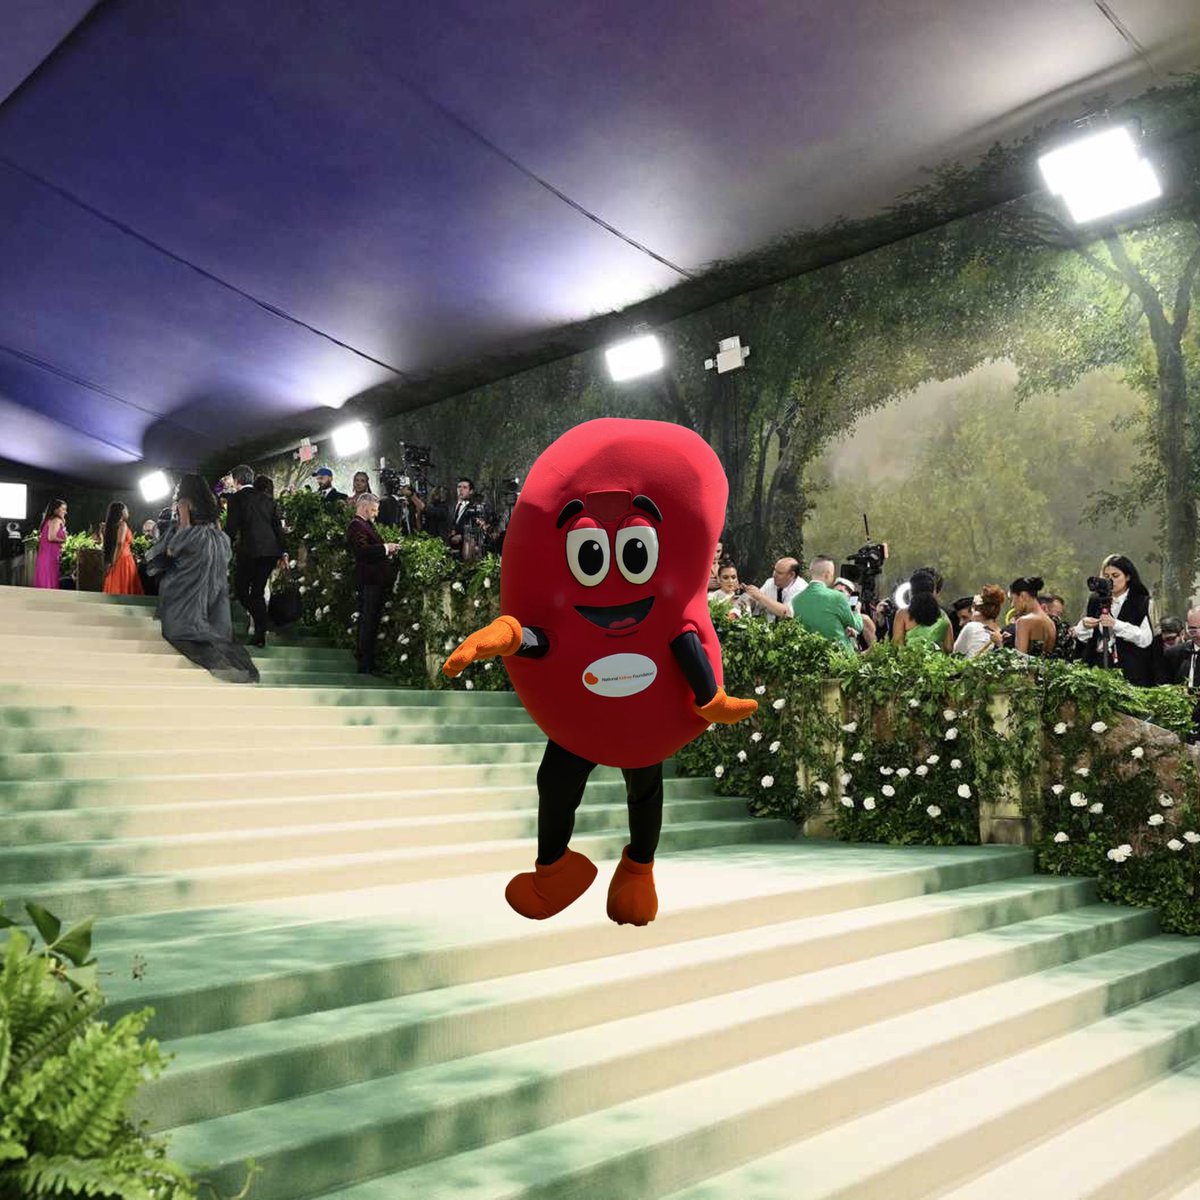 Serving kidney realness at the #MetGala